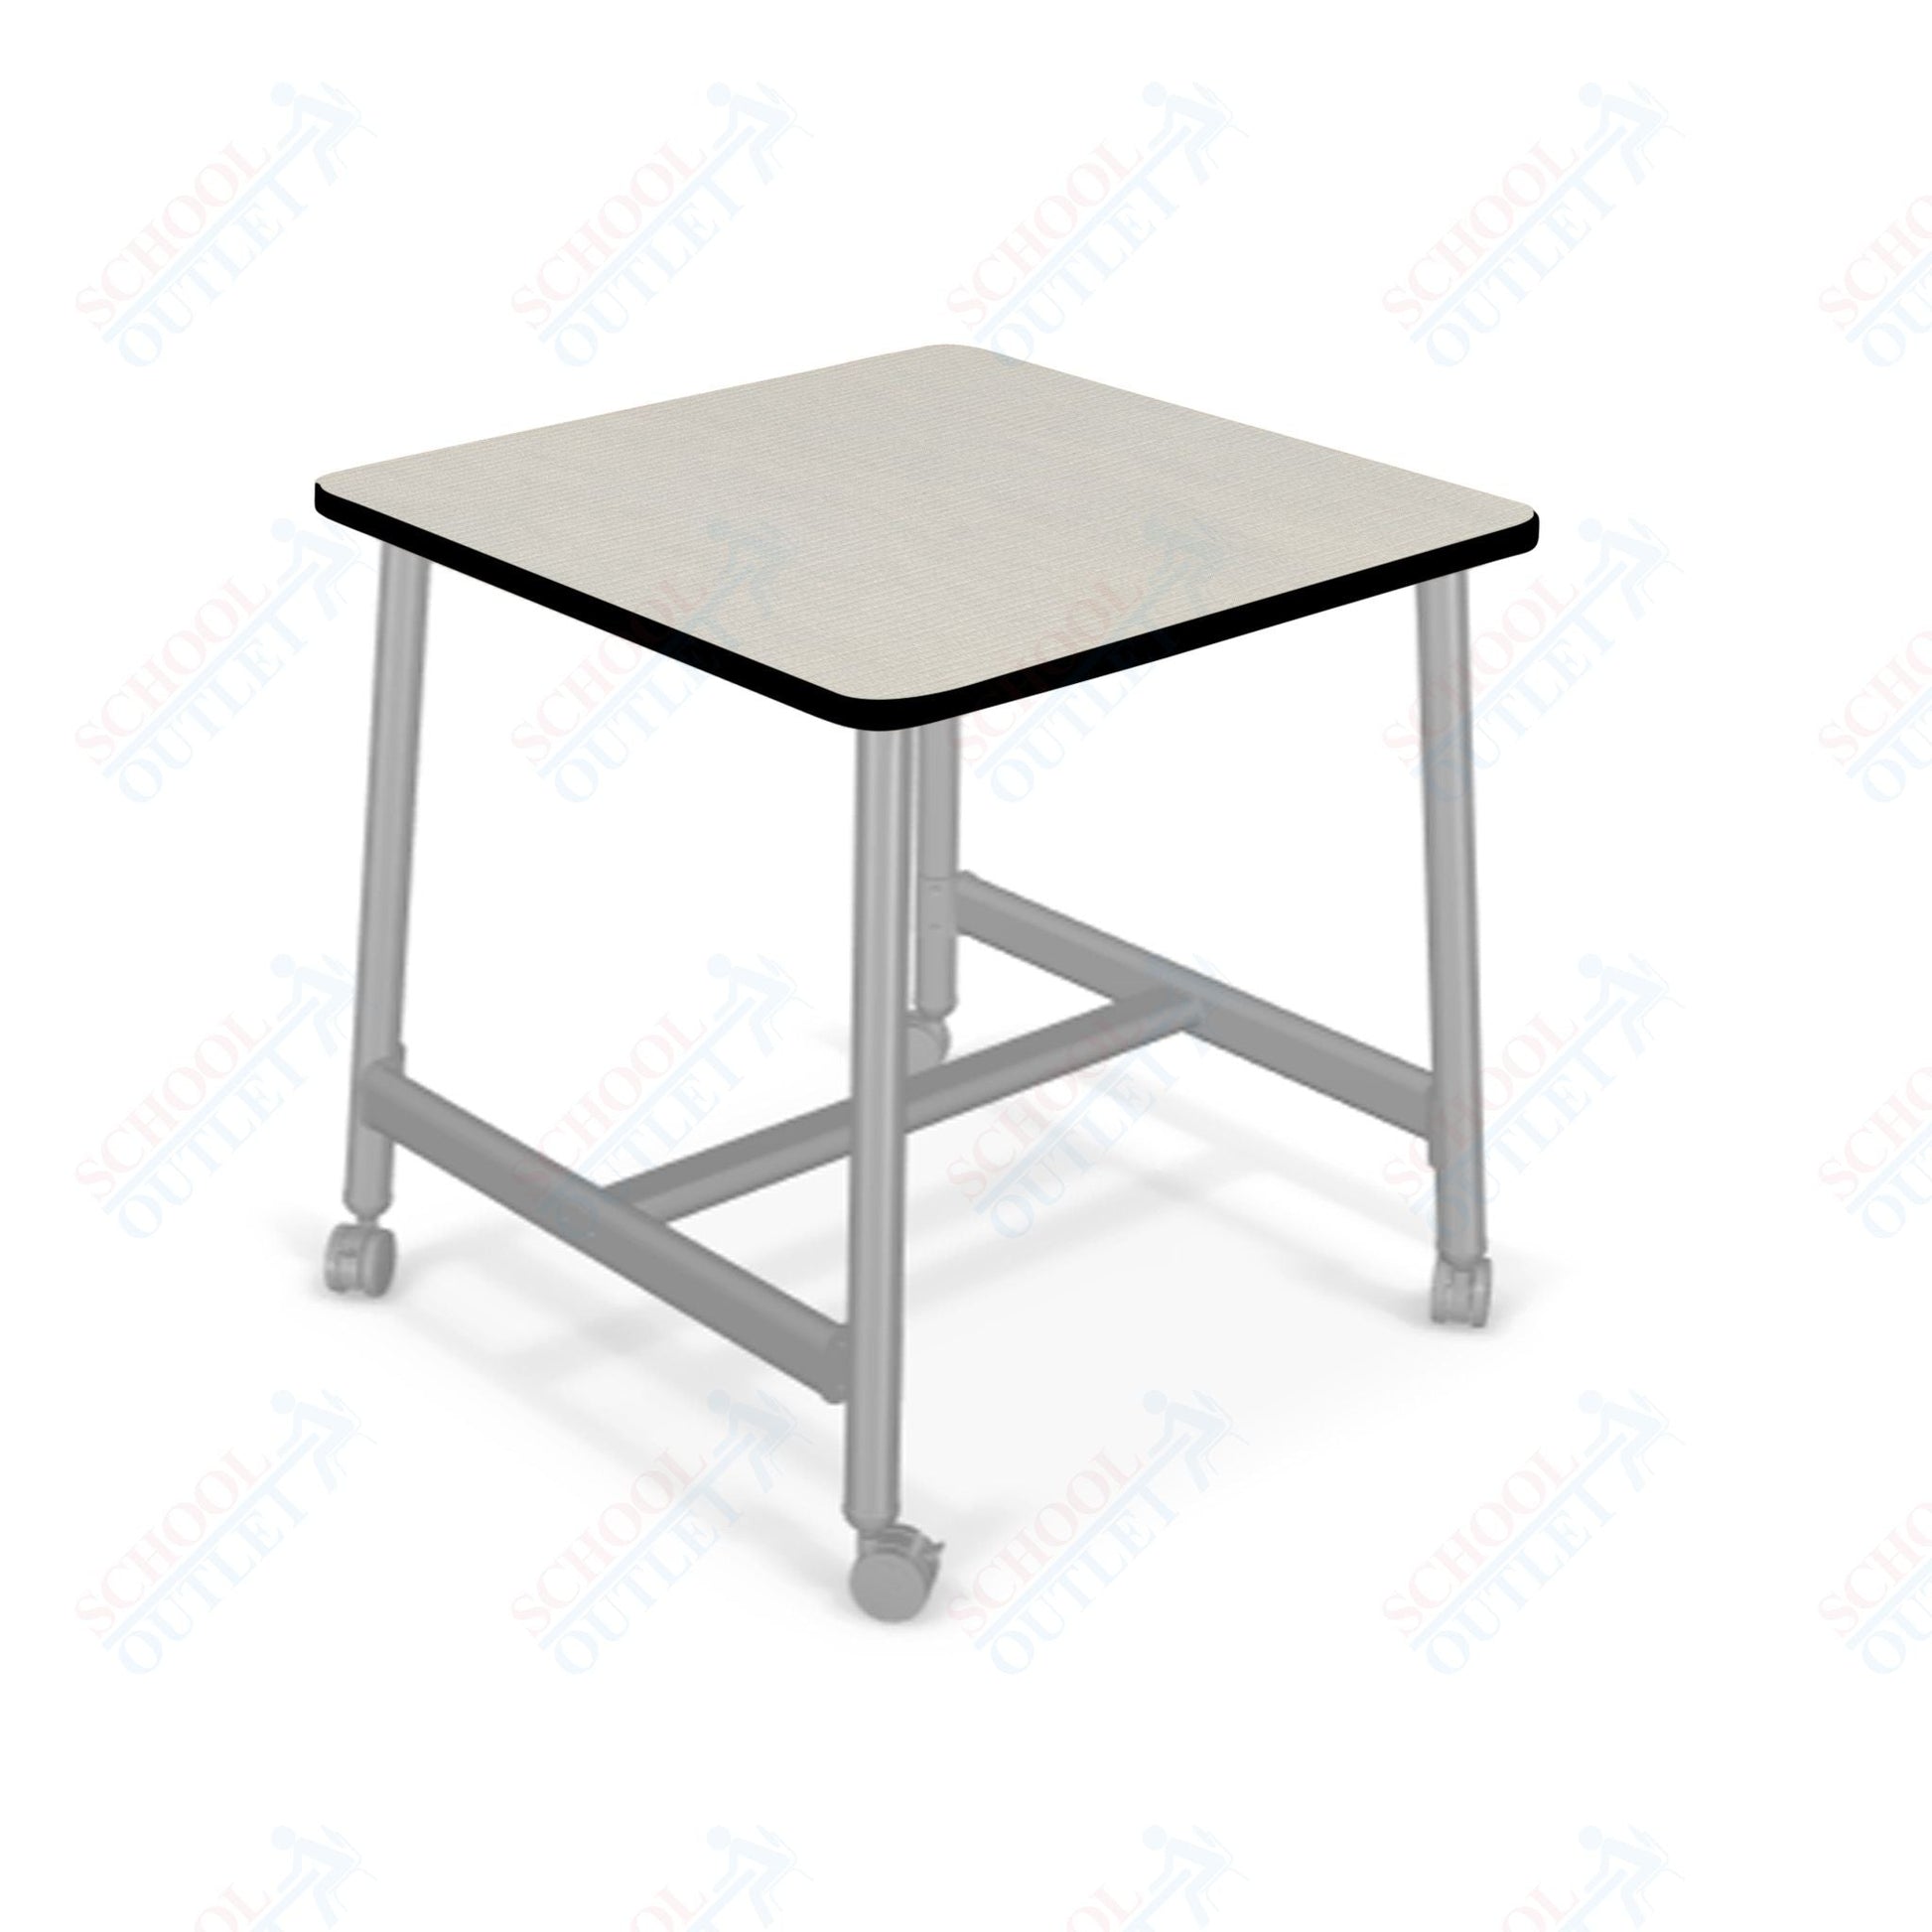 Mooreco Akt Table – 36" Square, Laminate or Butcher Block Top, Fixed Height Available in 29"H, 36"H, or 42"H - SchoolOutlet